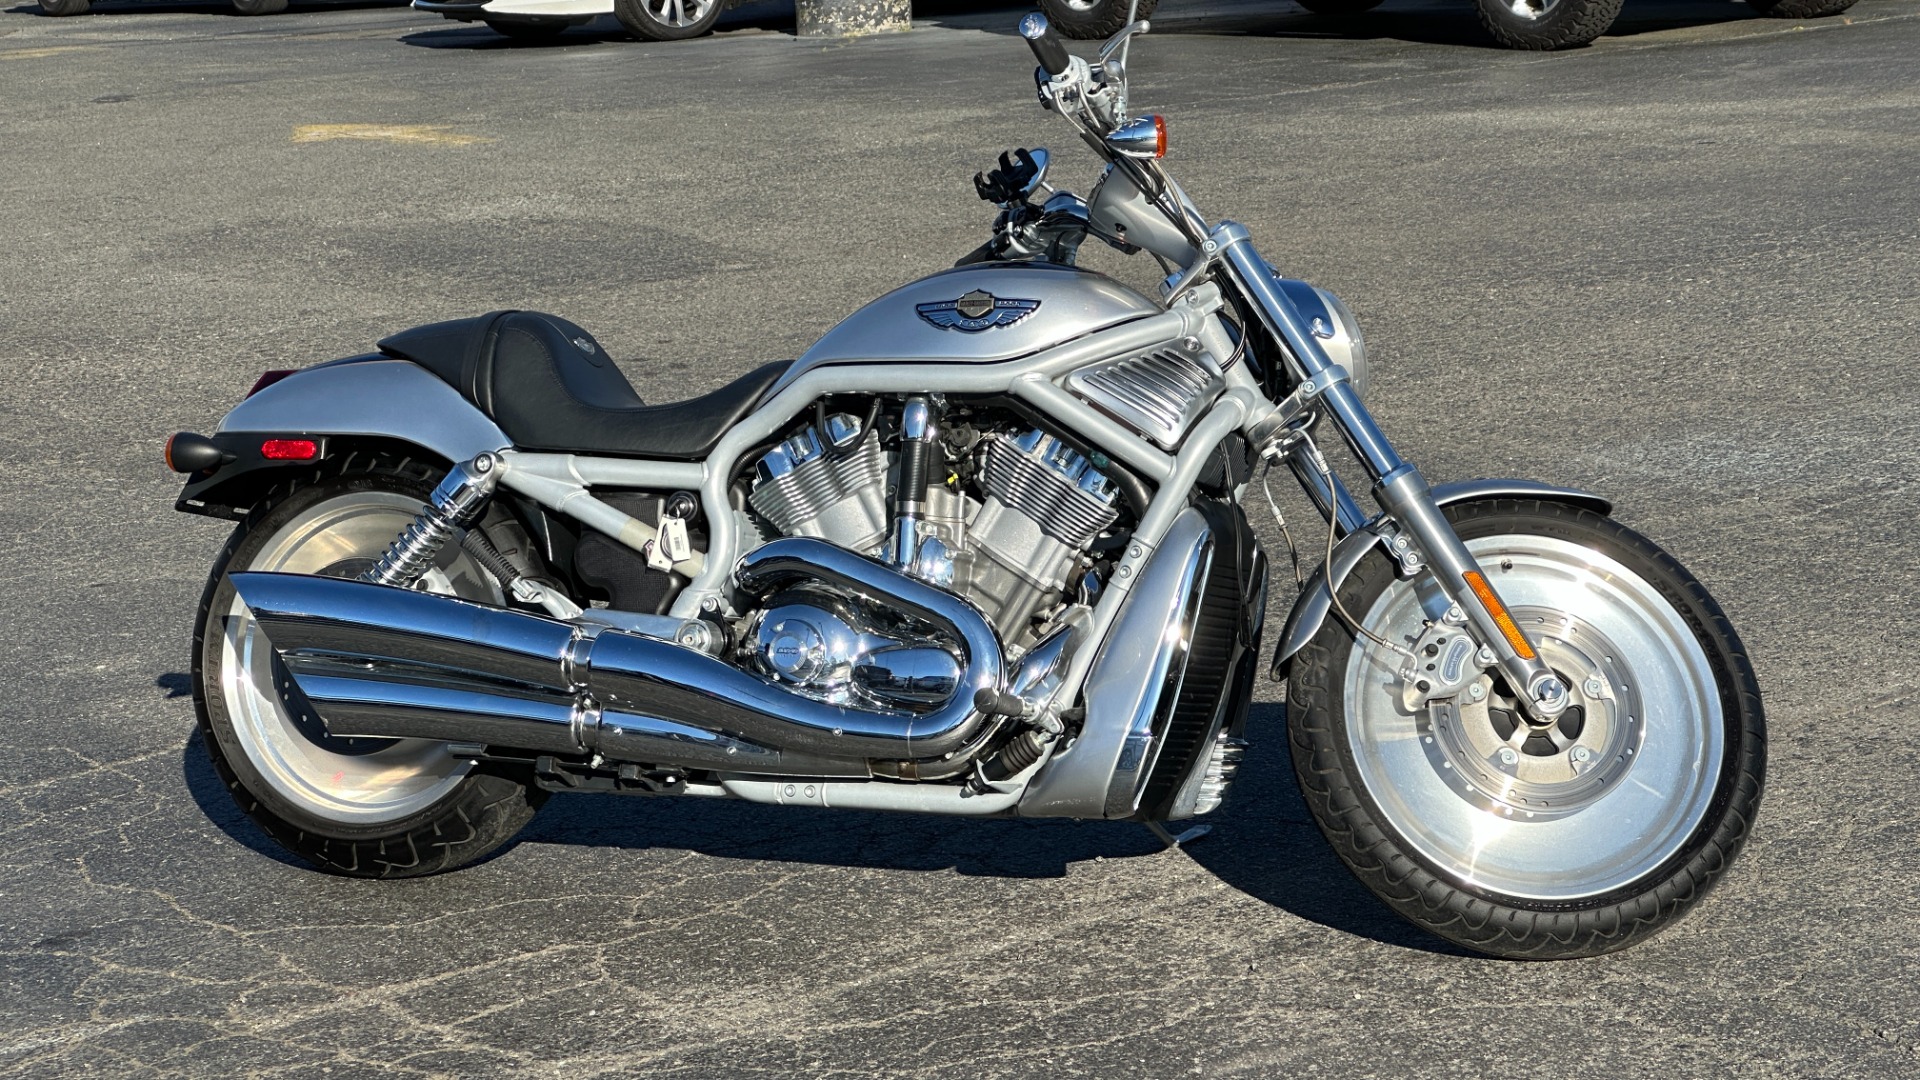 Used 2003 Harley Davidson V Rod ANNIVERSARY EDITION / 1130CC ENGINE / BREMBO BRAKES / VORTEX AIR SCOOPS for sale $9,995 at Formula Imports in Charlotte NC 28227 61